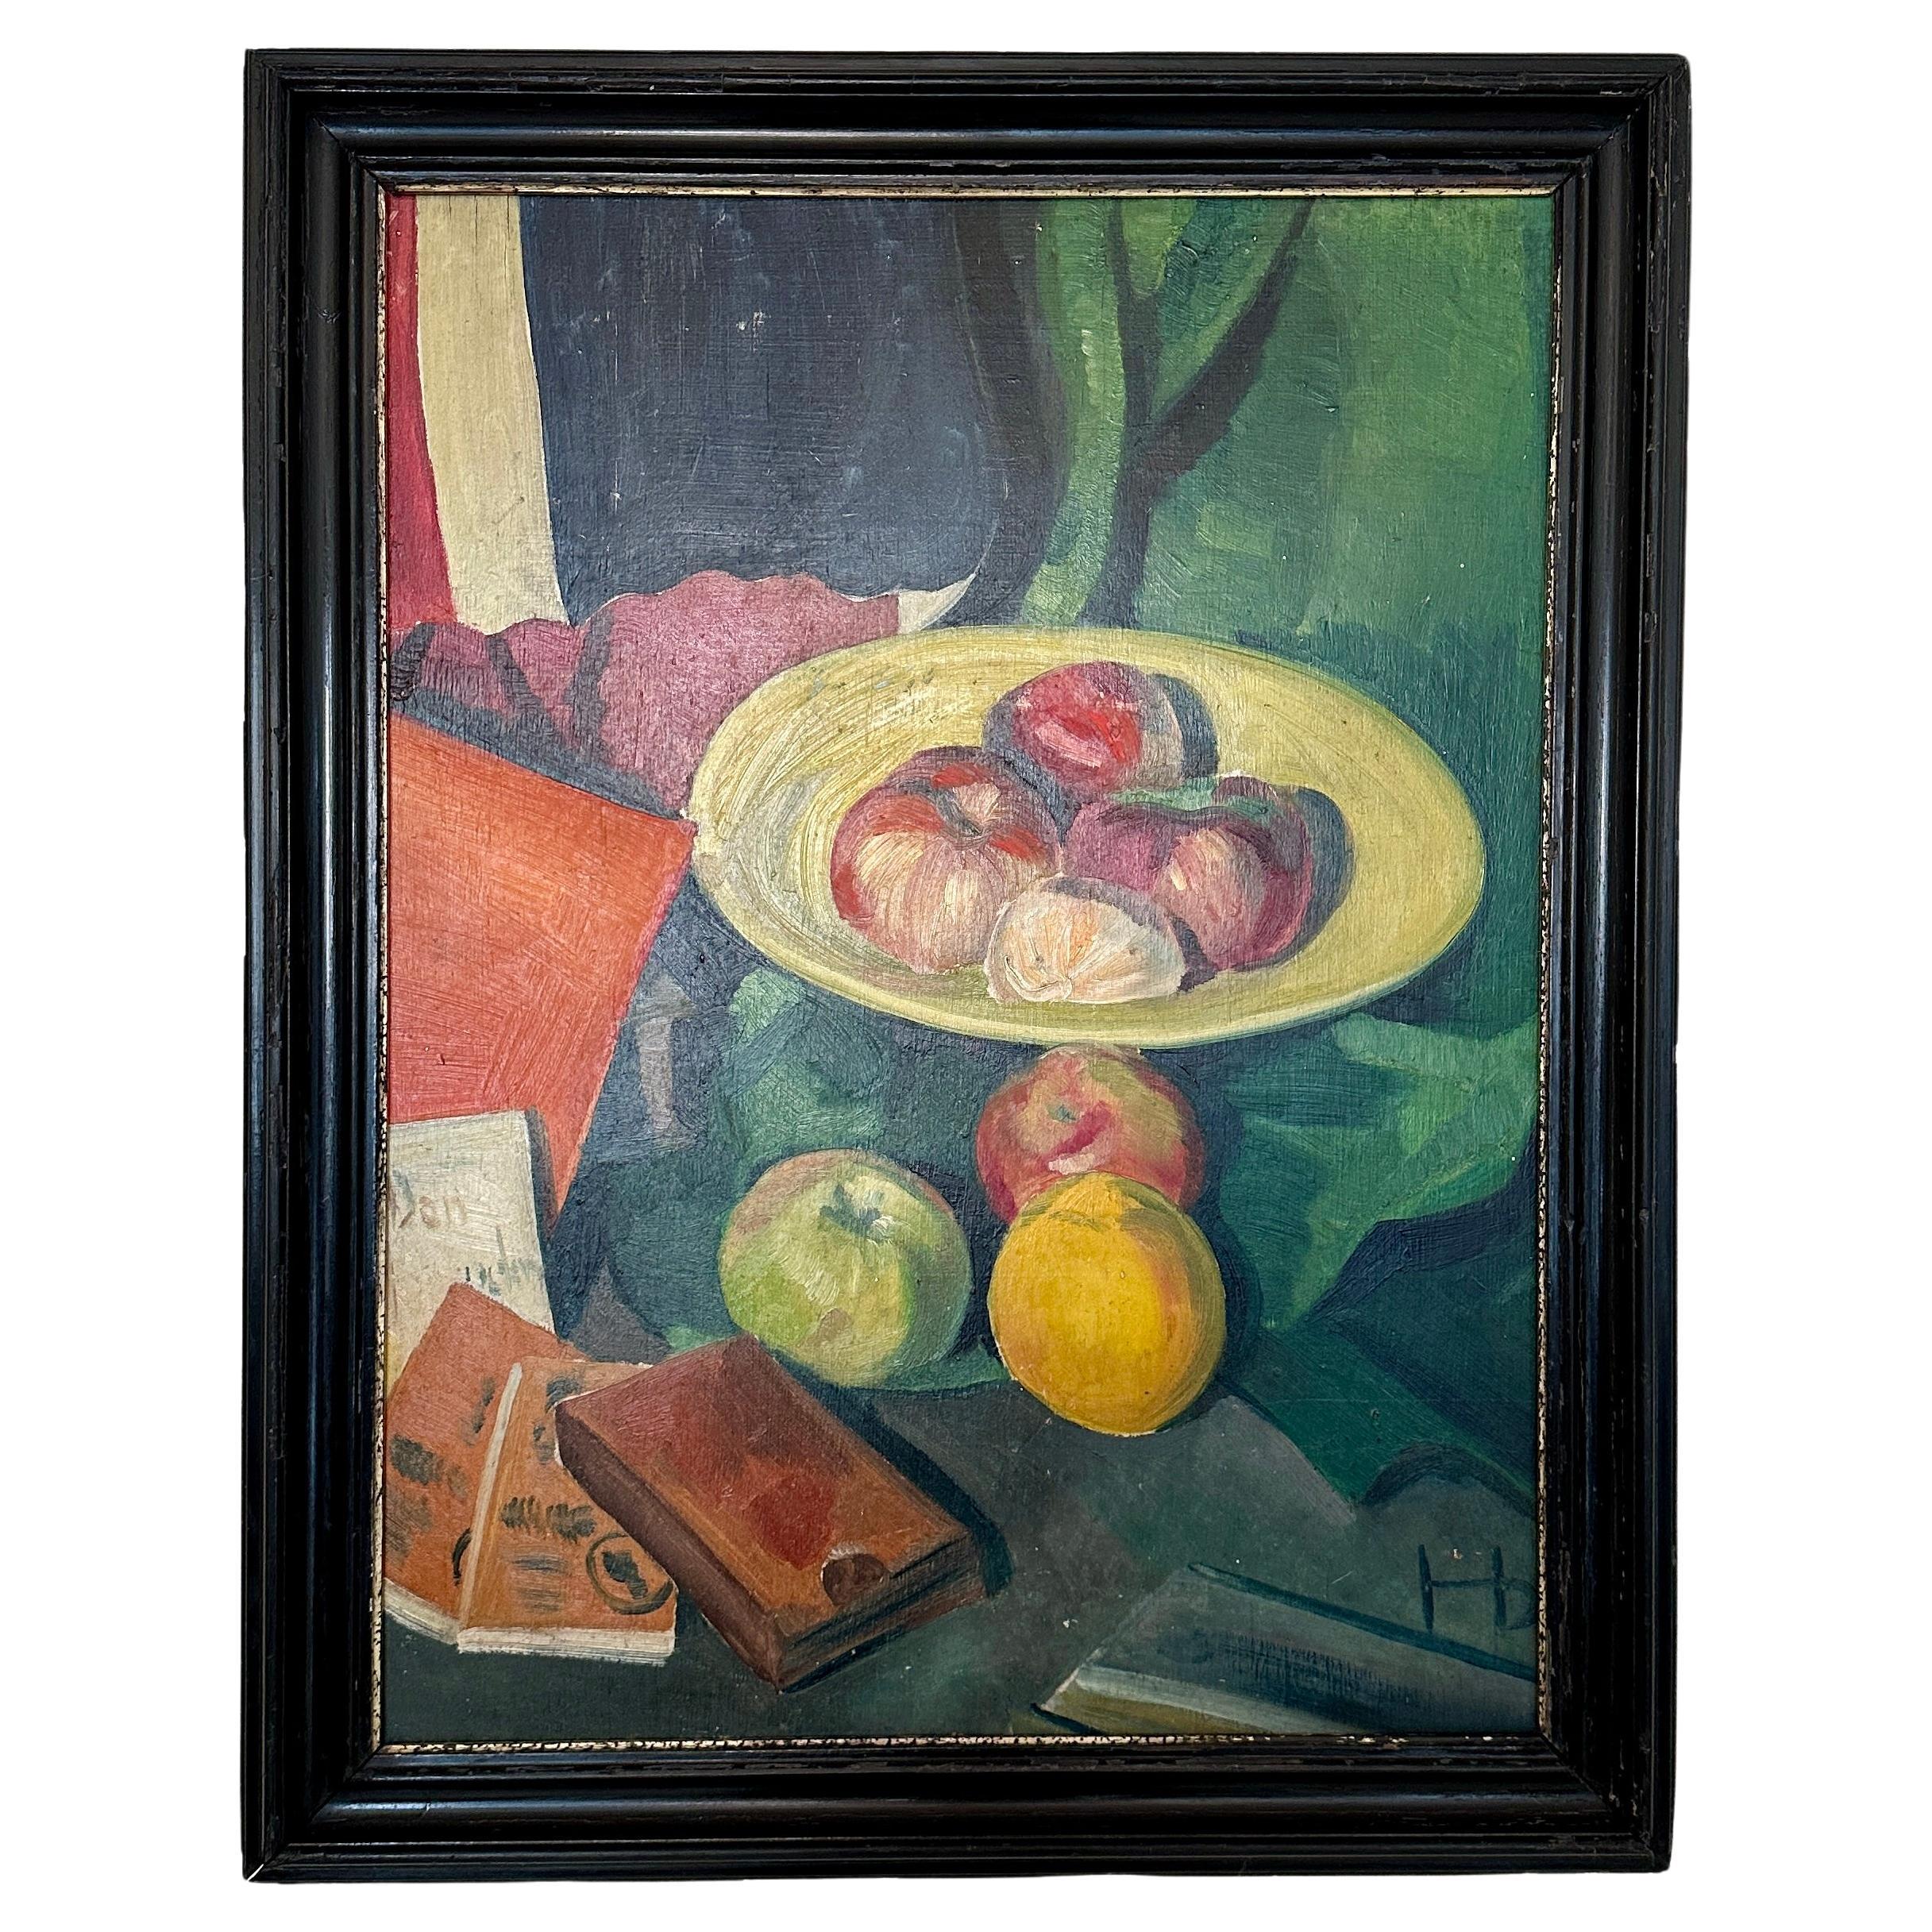 1920s Naive Still Life Oil Painting with Fruits and Books in a Black Frame